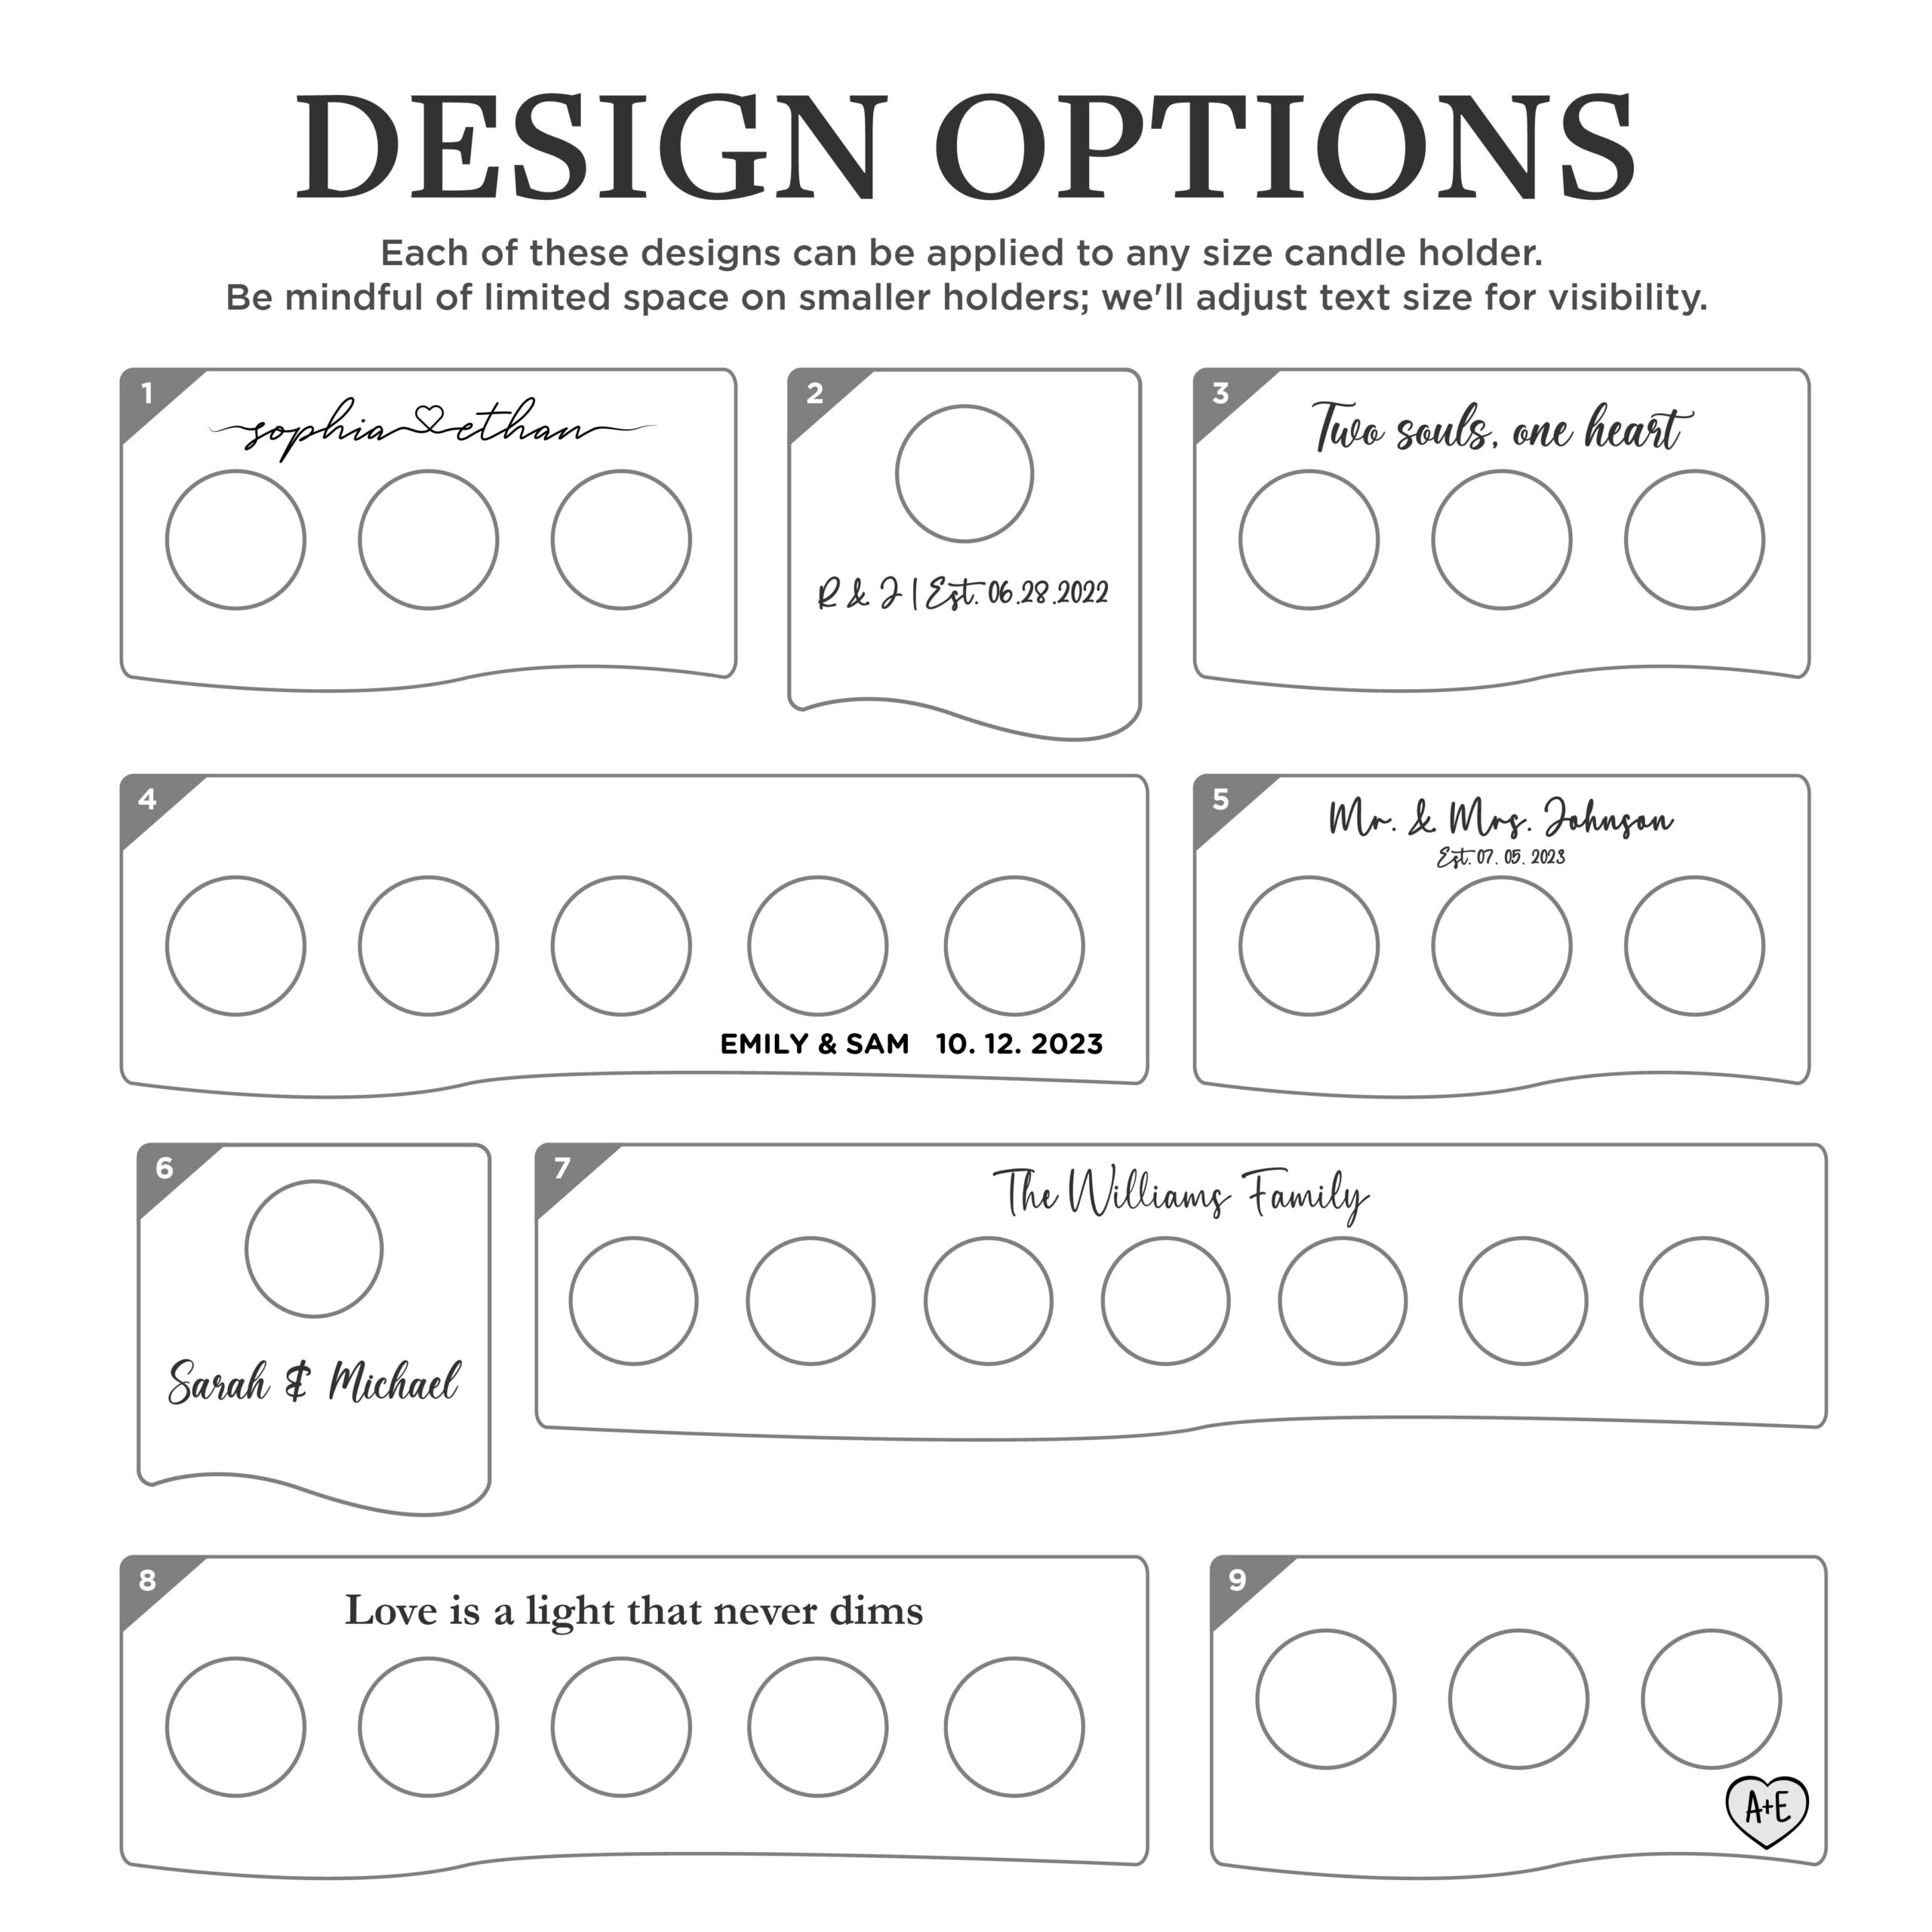 A design options sheet with a number of different options.